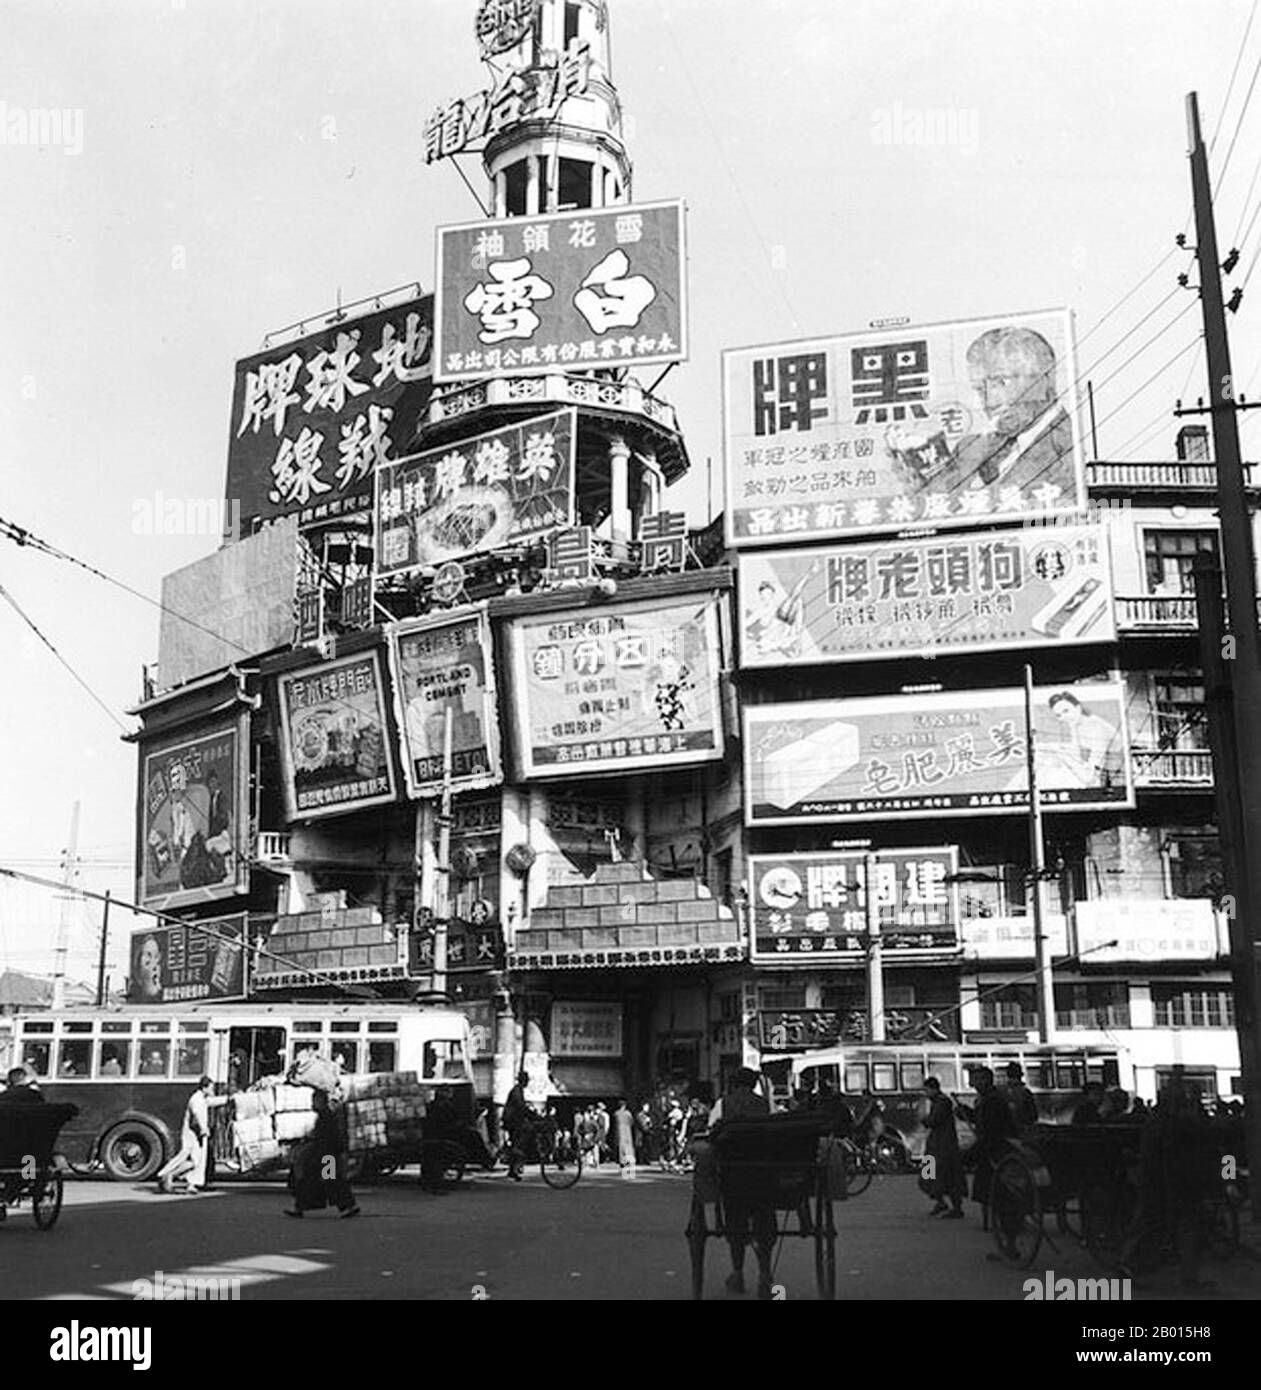 China: Shanghai's Da Shijie or Great World entertainment centre in 1948.  Shanghai's Da Shijie or Great World entertainment centre, past its 1930s prime and covered in advertising hoardings, in 1948. Stock Photo